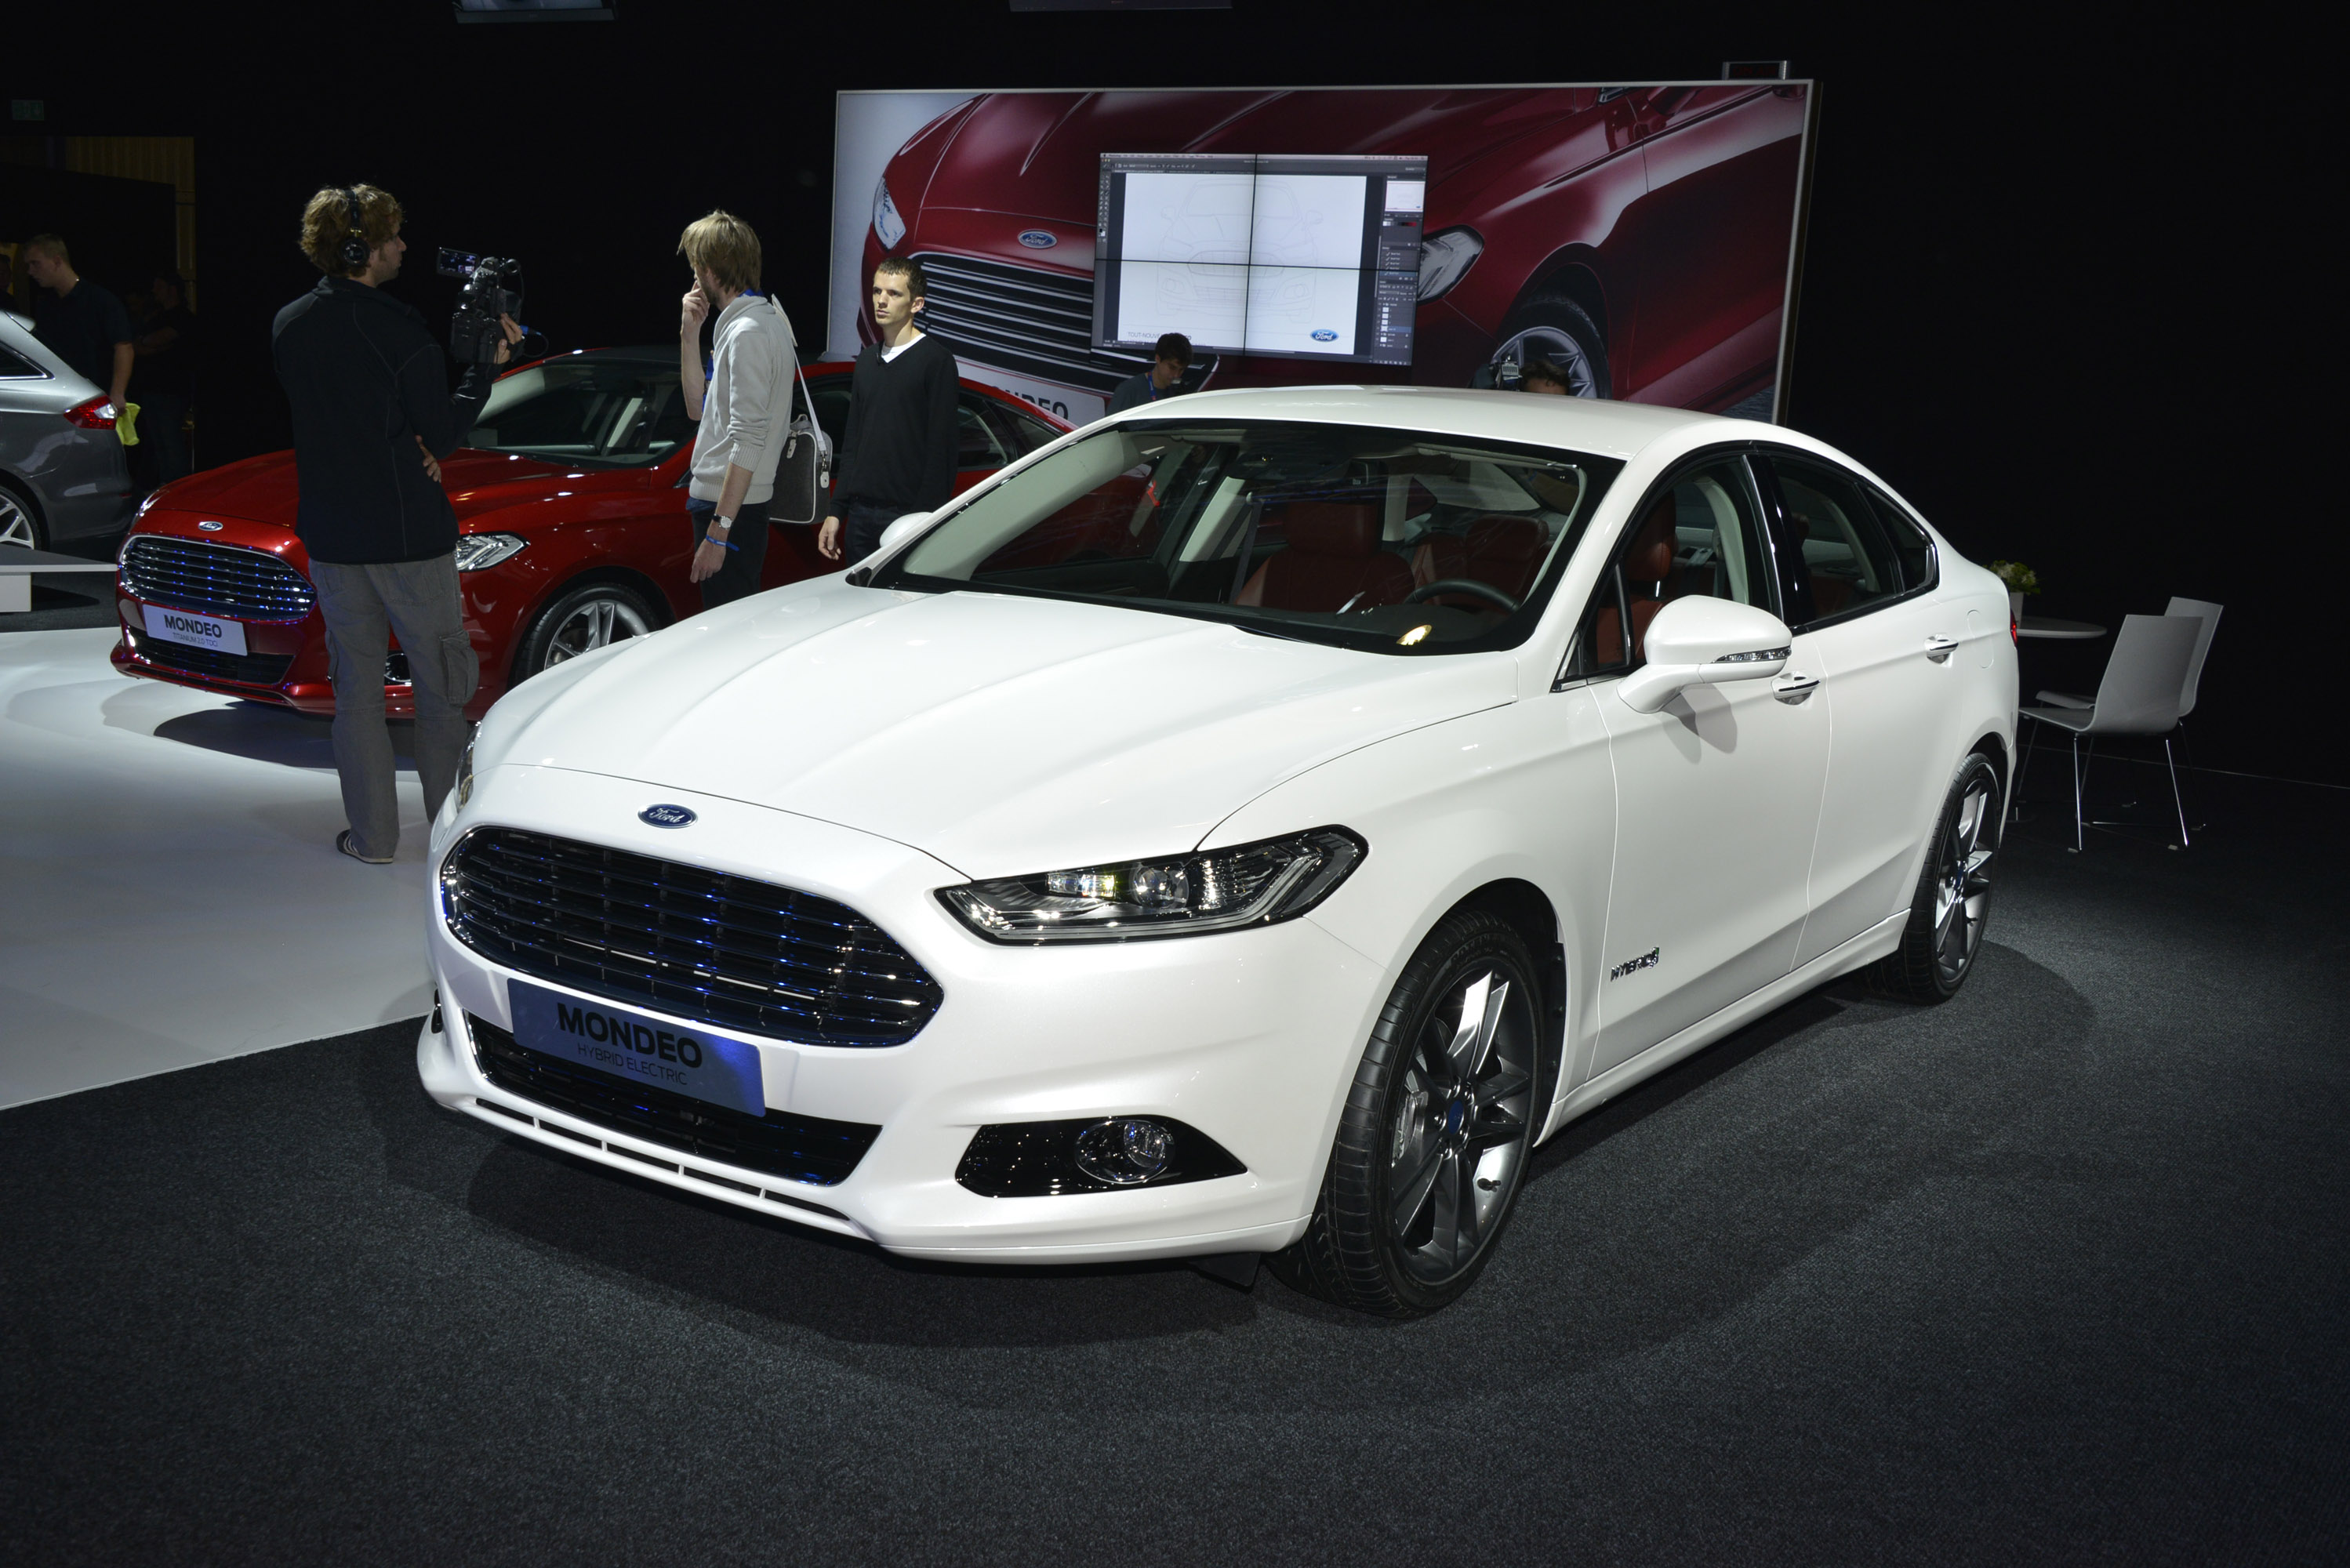 Ford Mondeo Hybrid exterior restyling